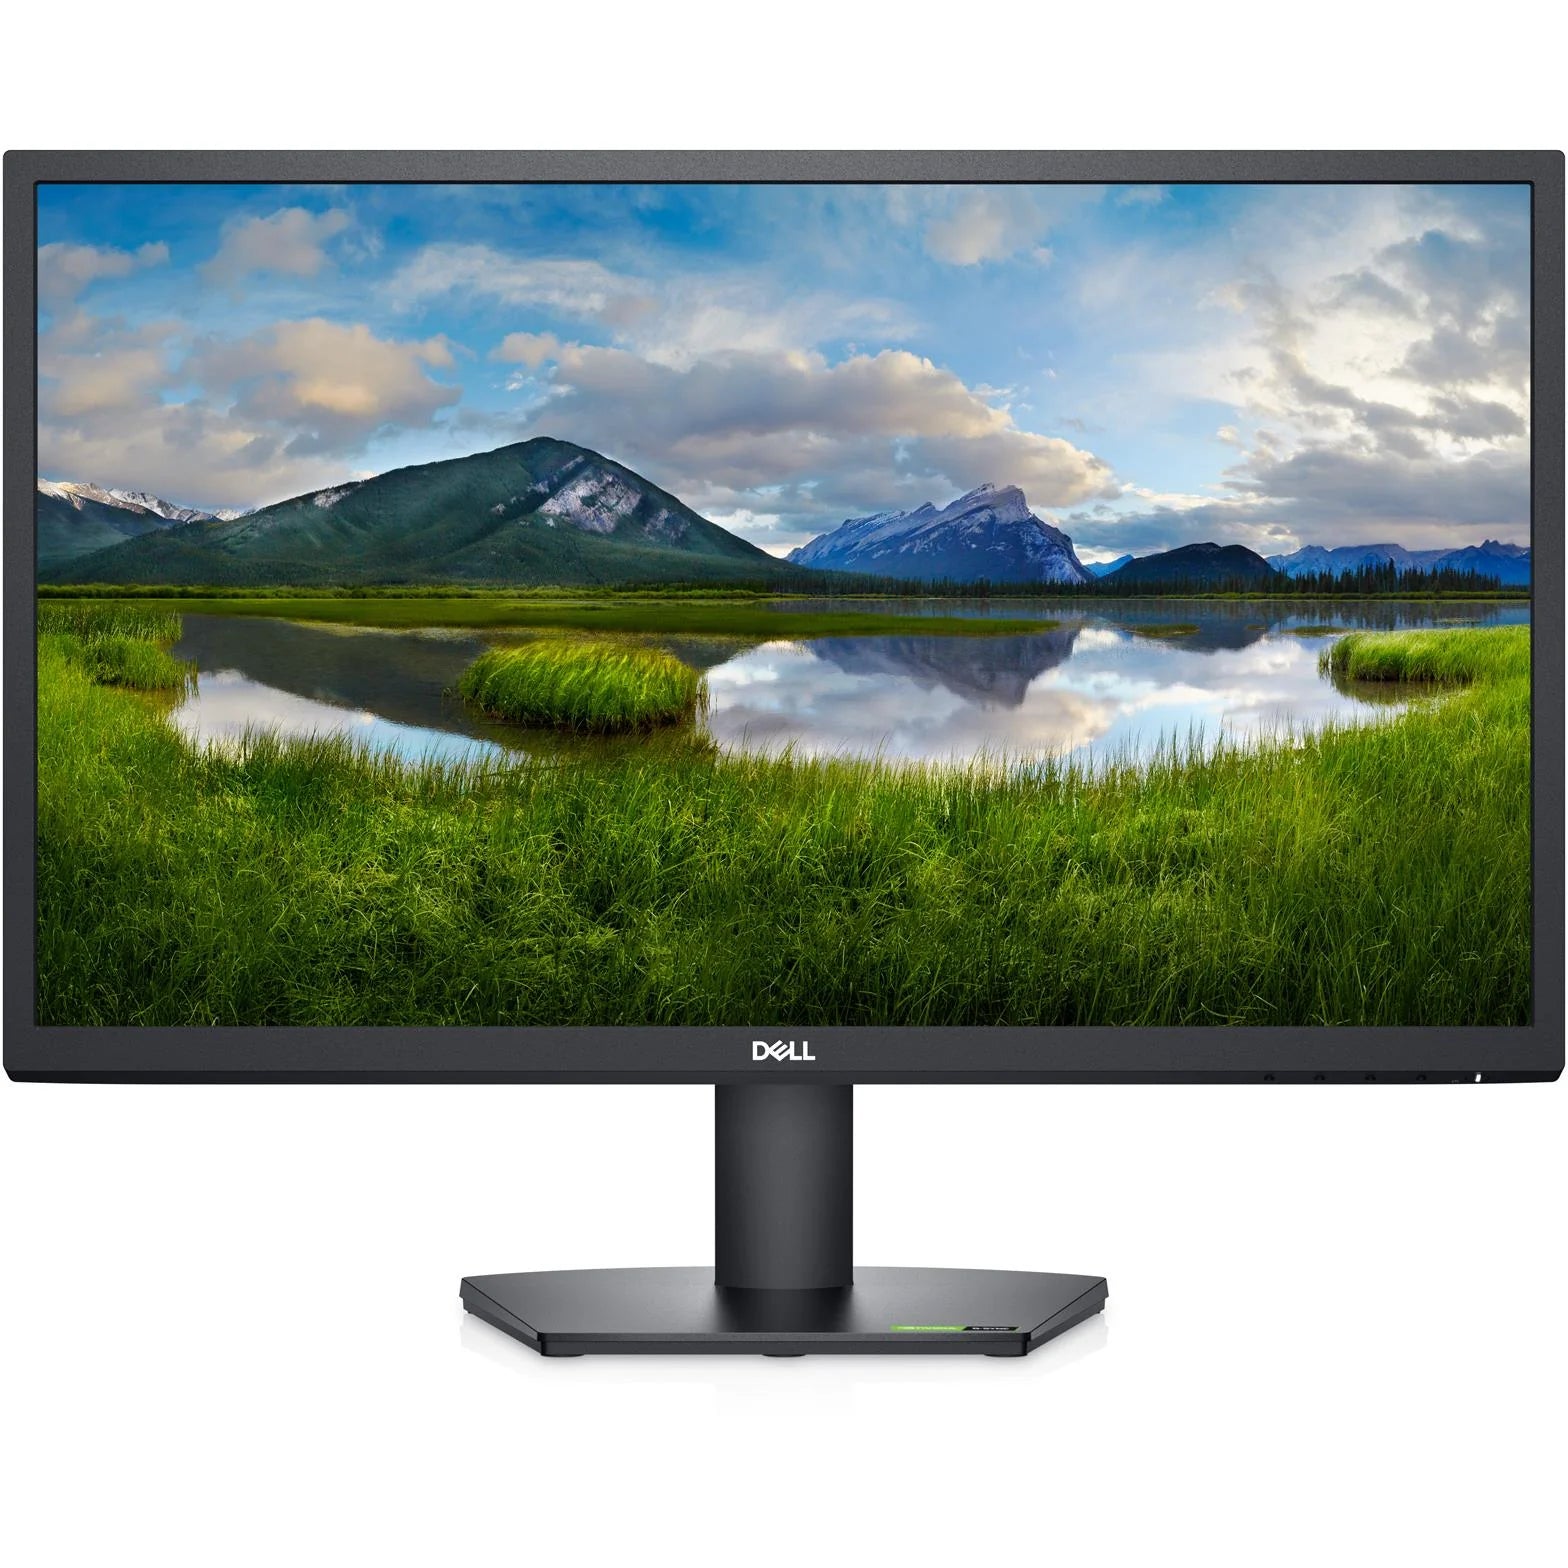 Dell 24 (SE2422H) Monitor, Full HD 1920x1080 75Hz, FreeSync - Refurbished Excellent Condition